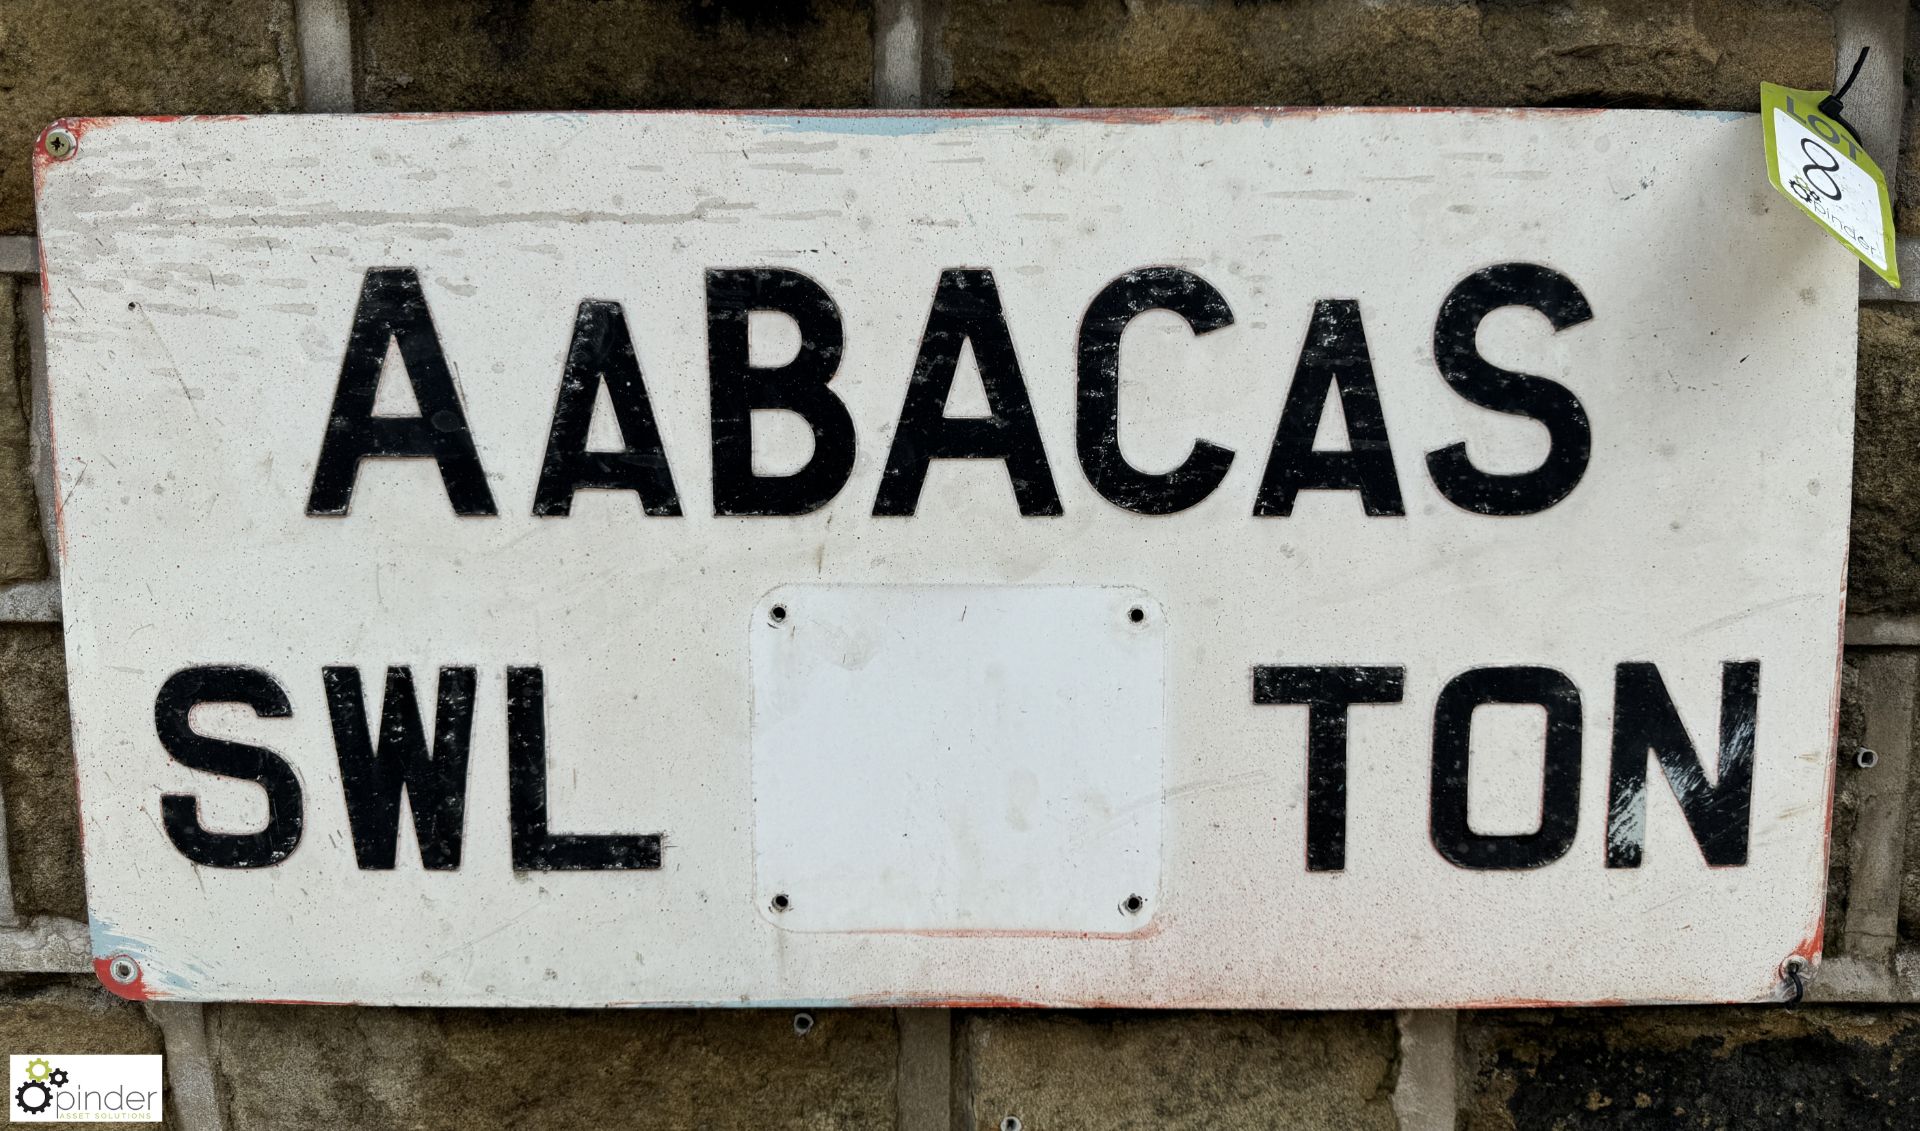 A cast aluminium Crane Sign “Aabacas standard weight load/ton”, approx. 15in x 30in long - Image 2 of 3